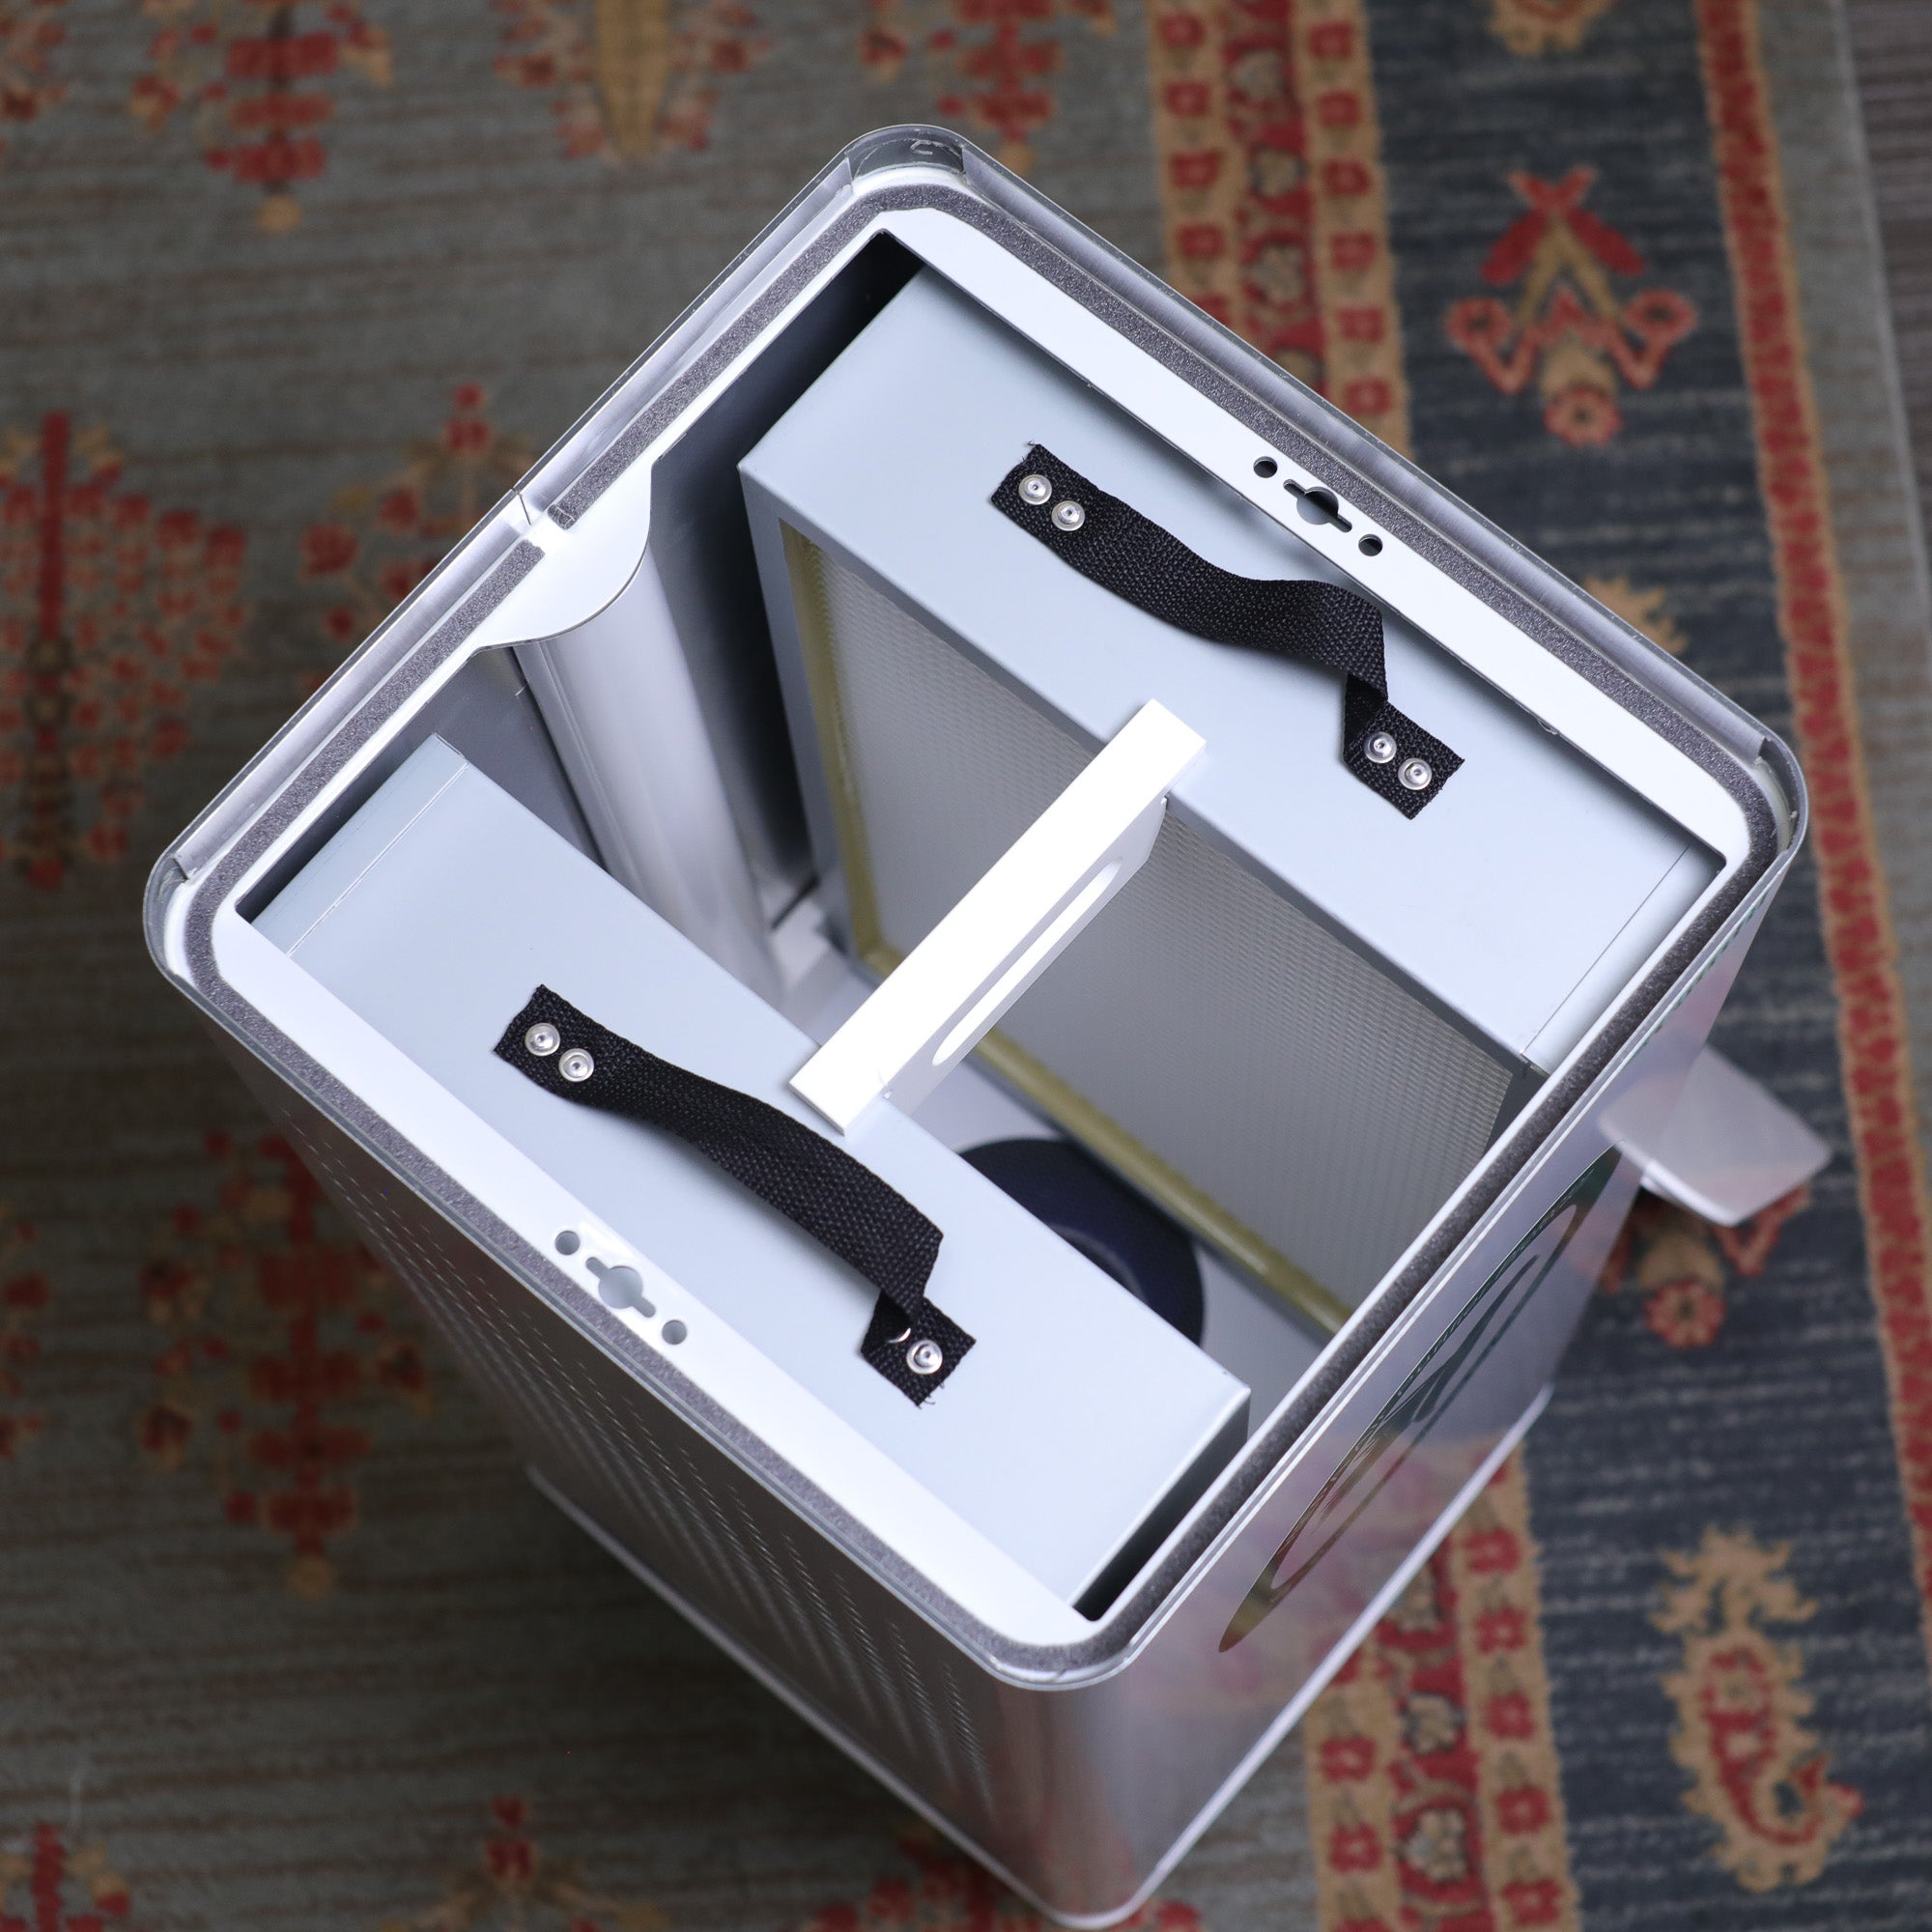 A silver CamFil box with two compartments designed for commercial air filtration.